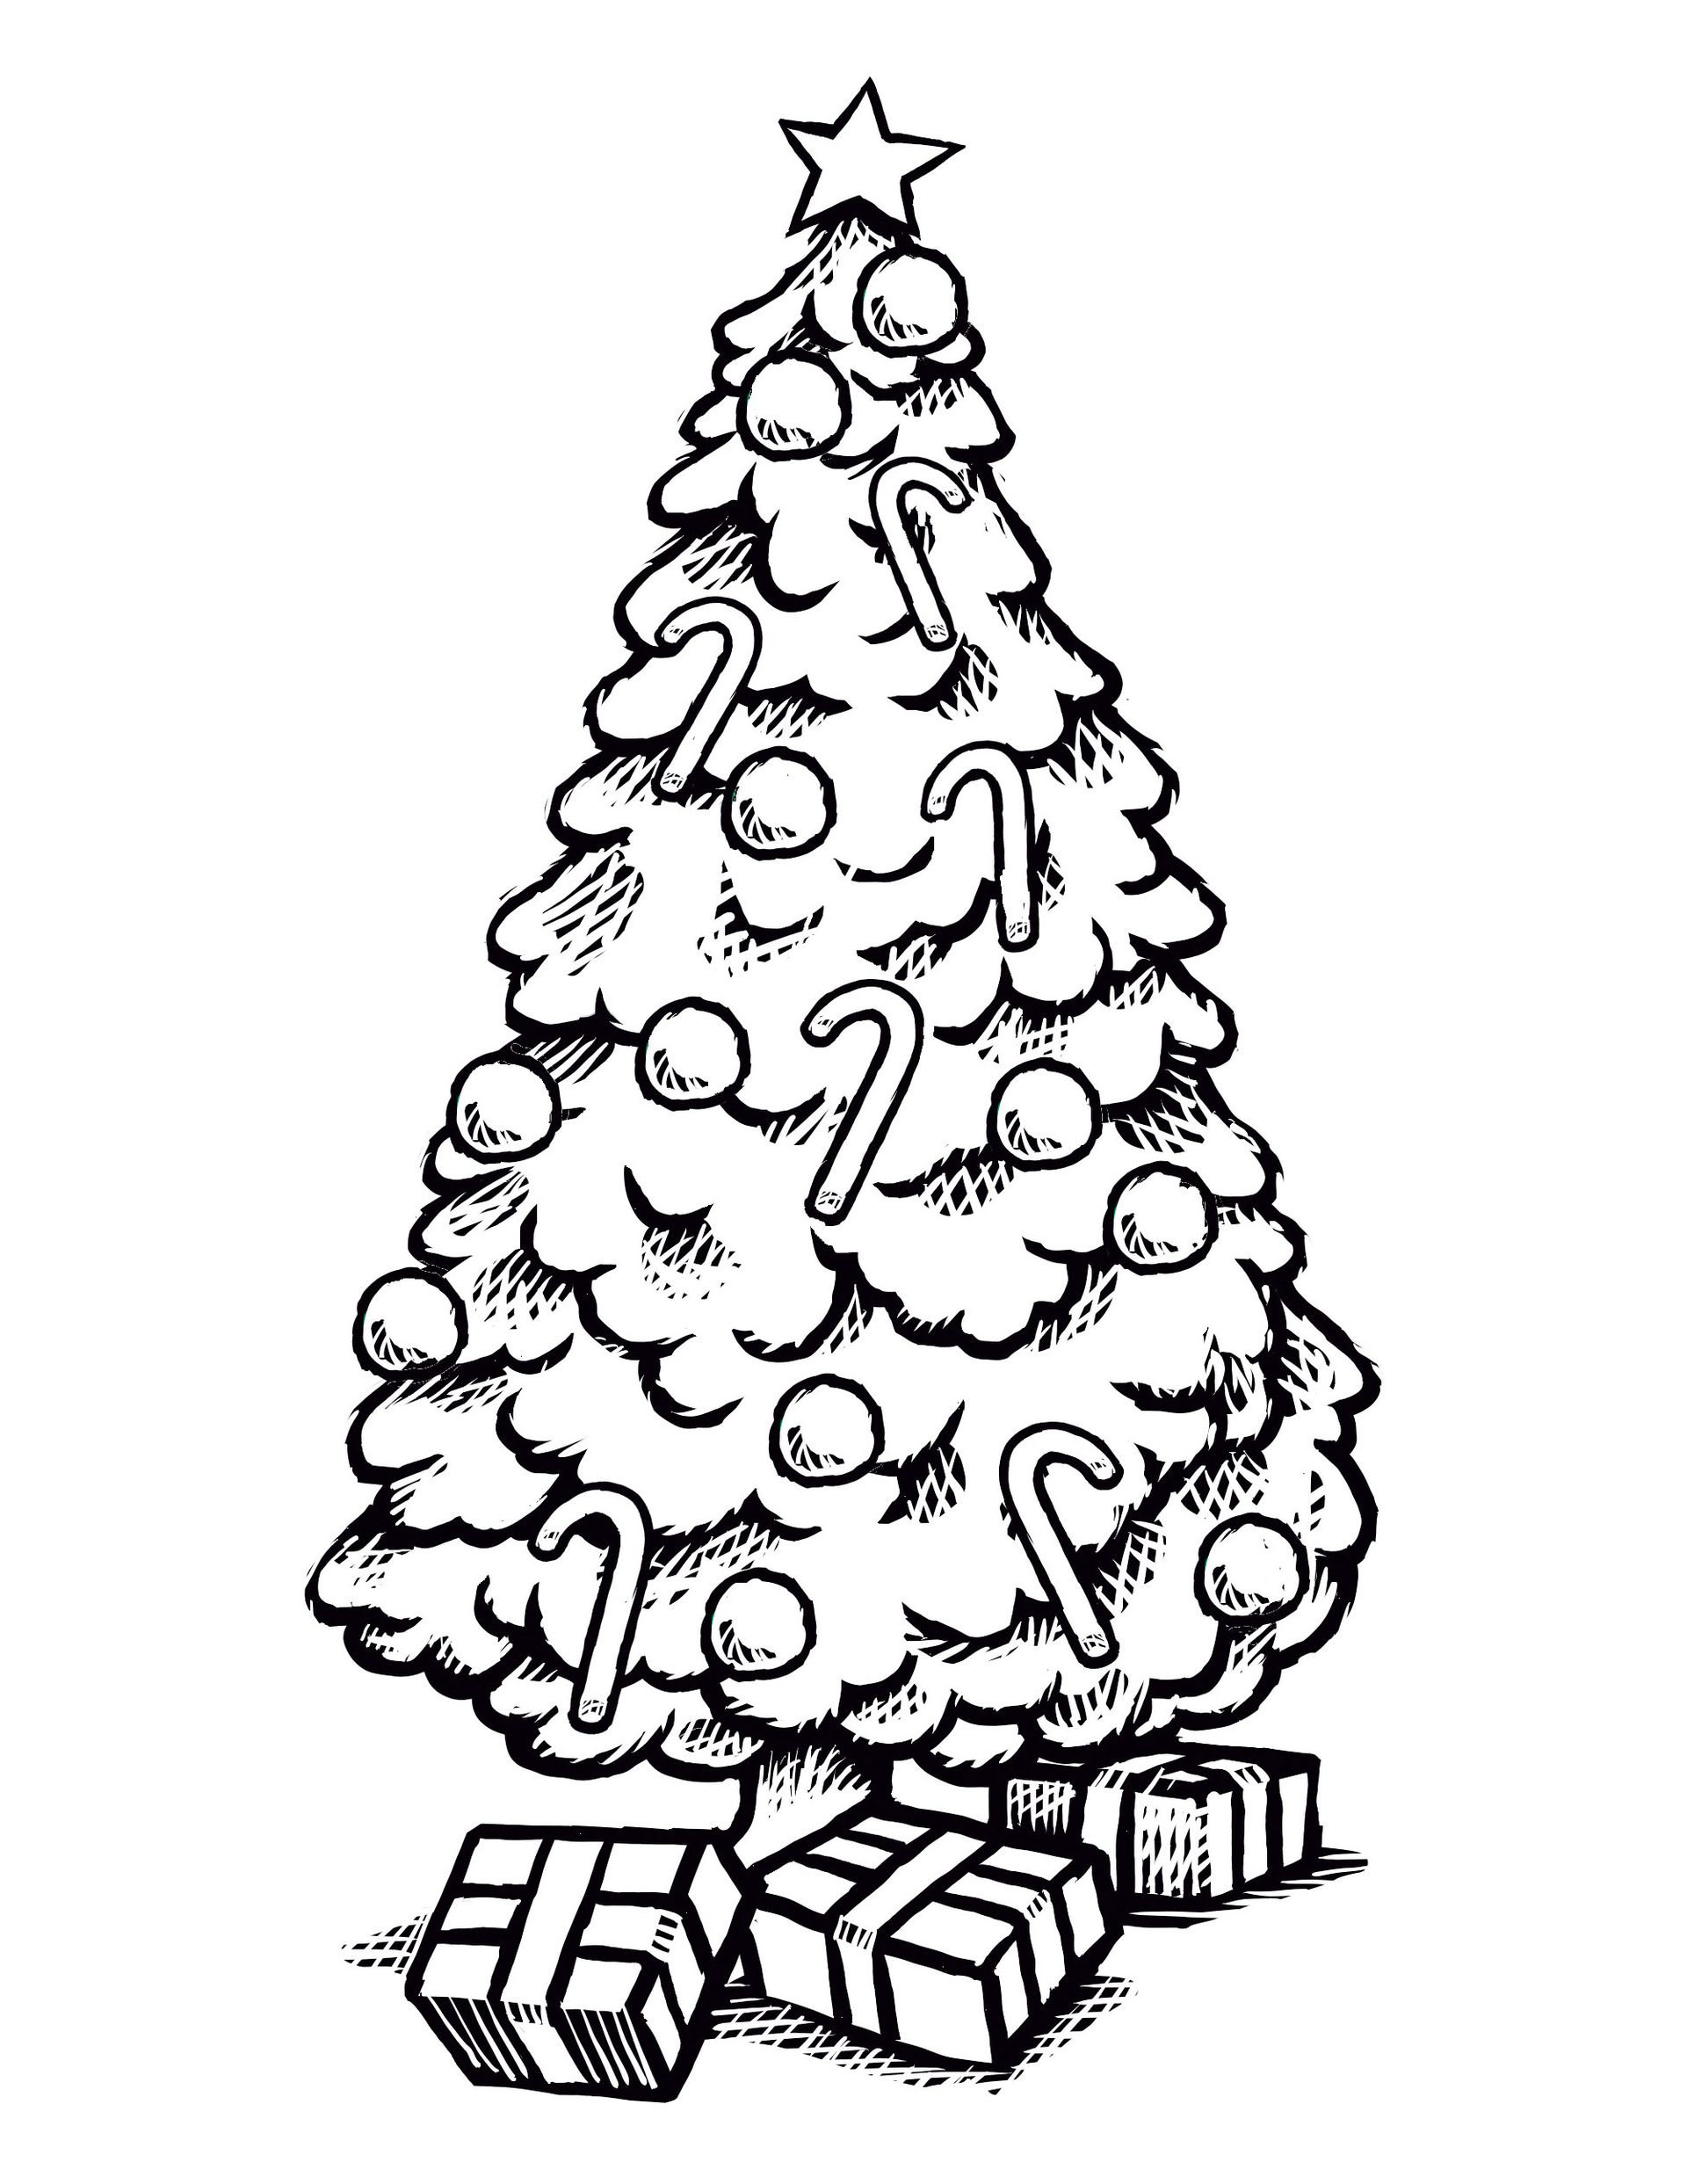 A coloring page of a Christmas tree and gifts.